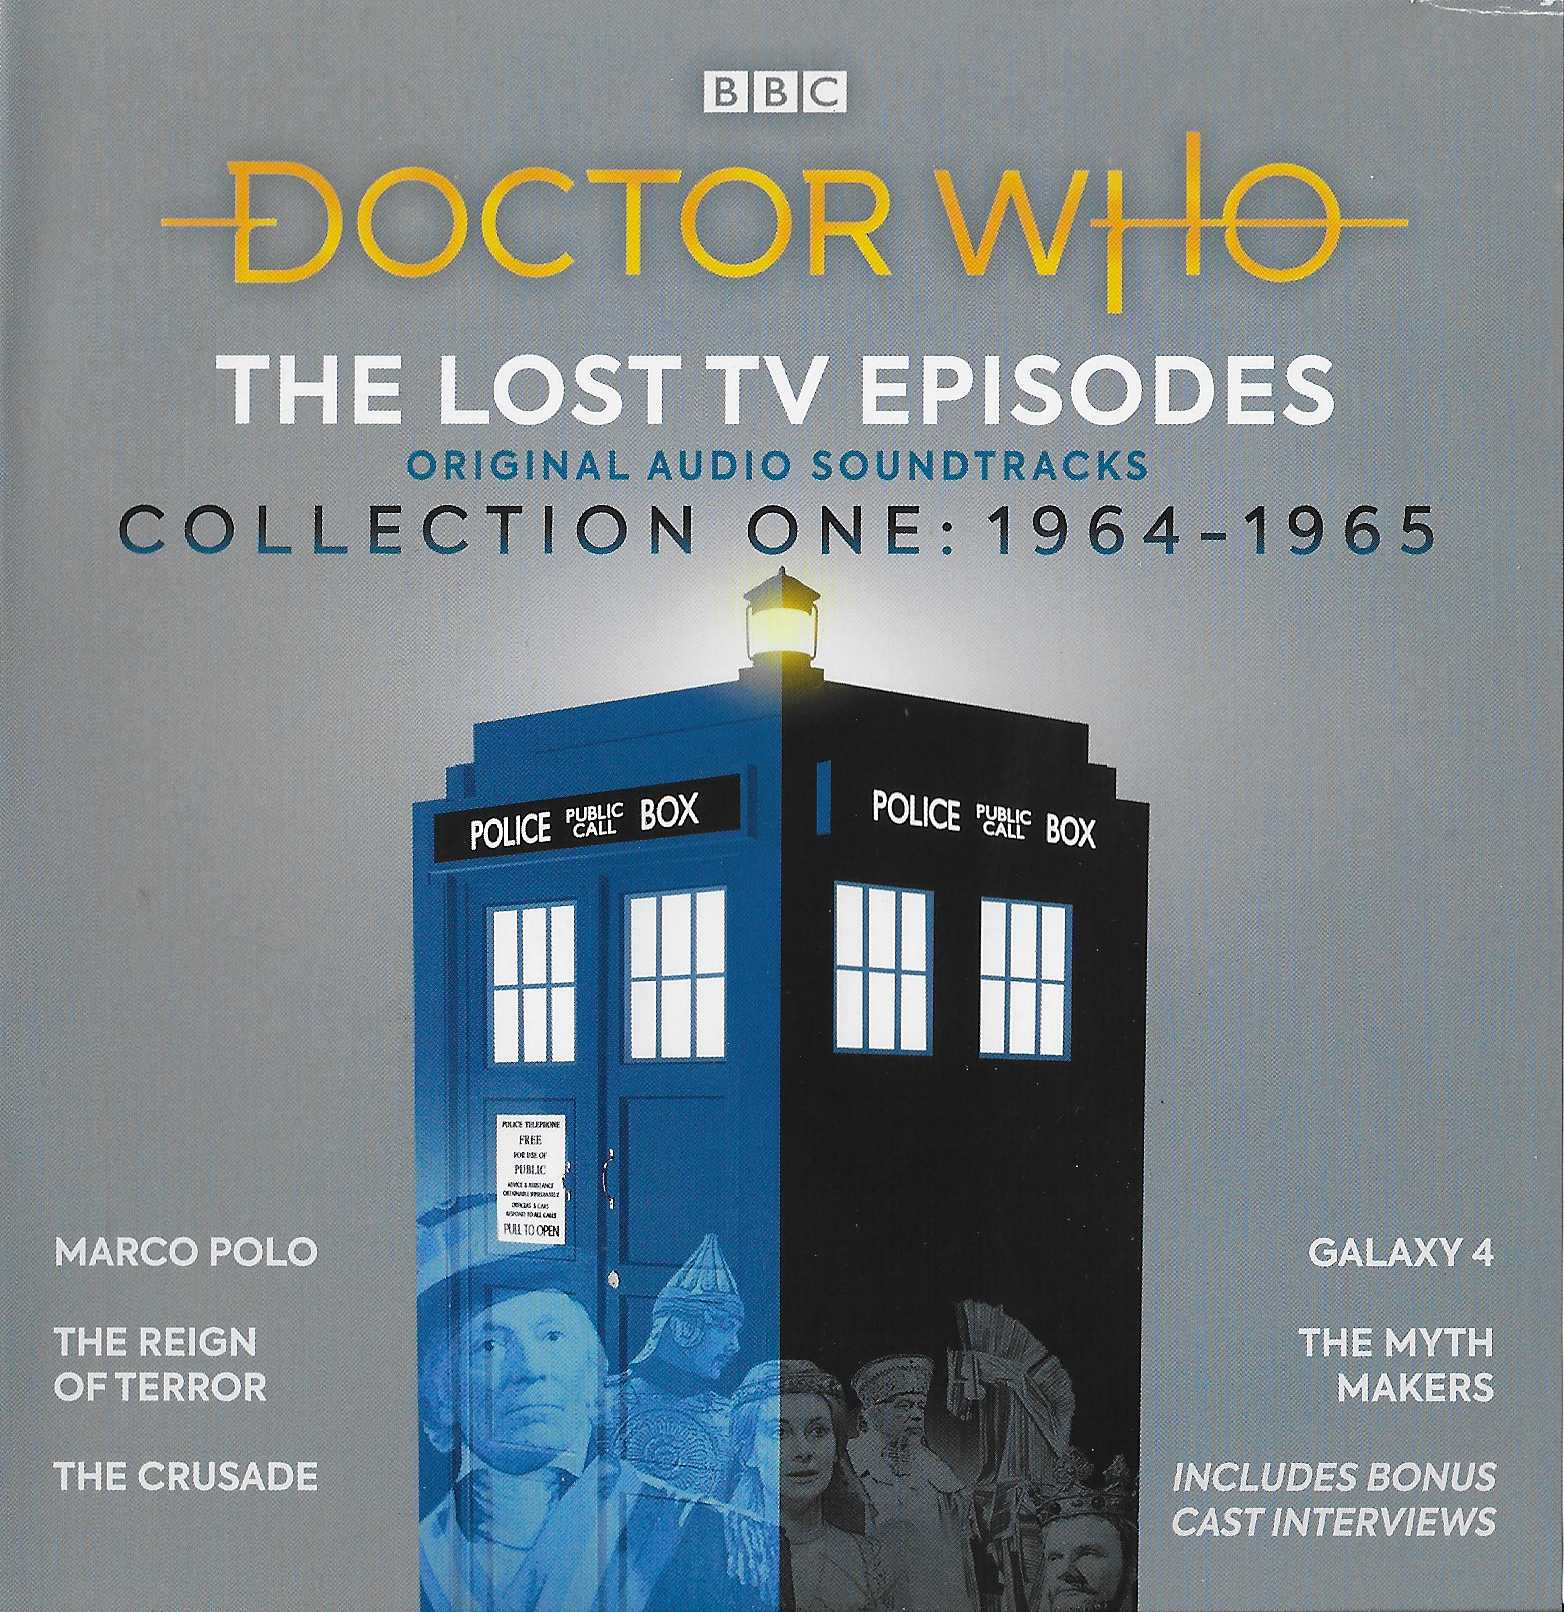 Picture of ISBN 978-1-78753-523-7 Doctor Who - The lost TV episodes - Collection one: 1964-1965 by artist Various from the BBC records and Tapes library